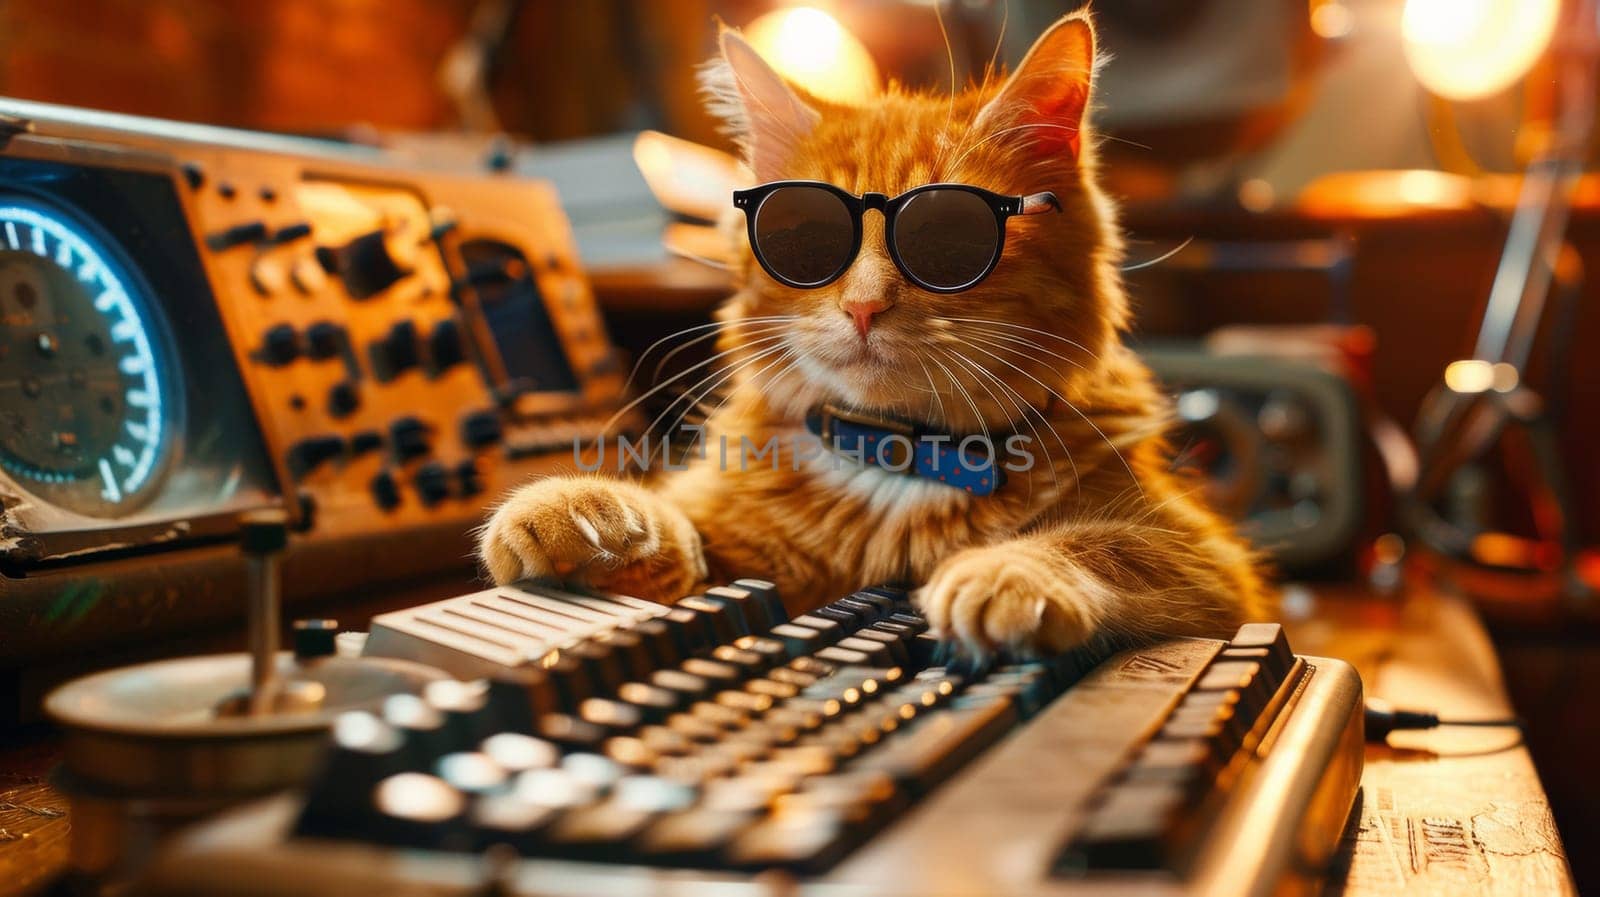 A cat wearing sunglasses and a keyboard with lights on it